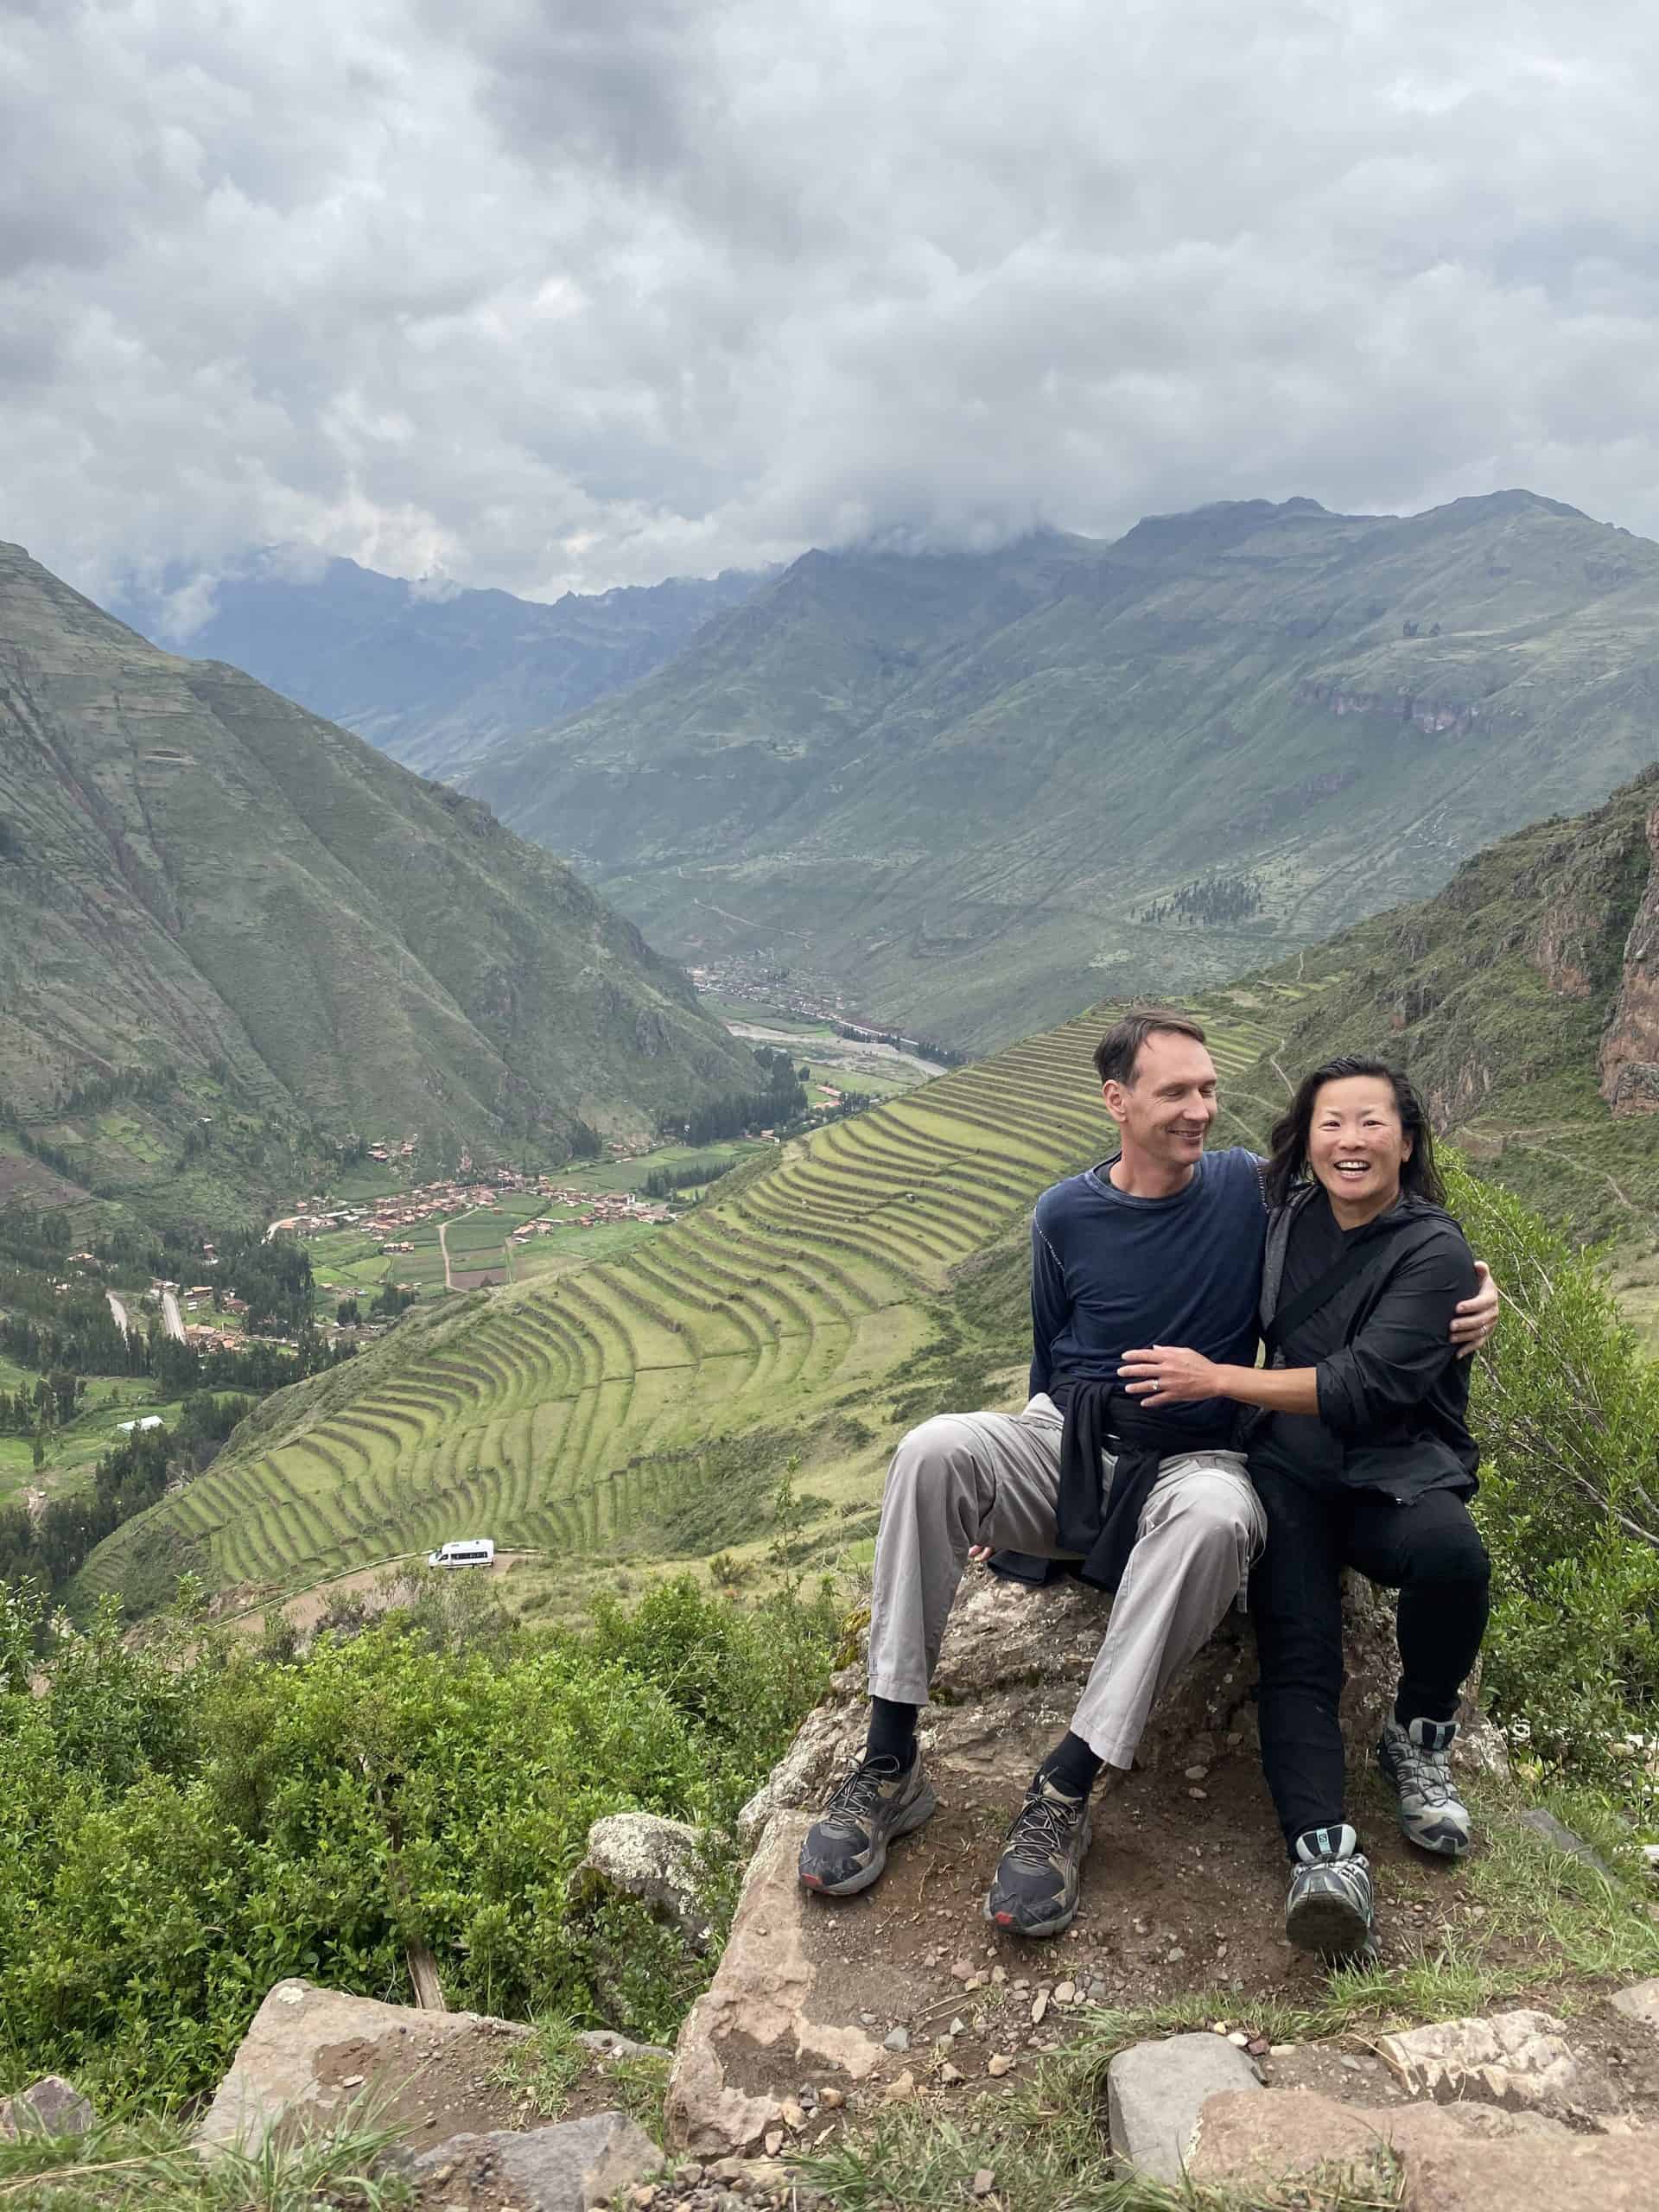 A couple enjoying a moment with a stunning view of lush, terraced hills and a valley in the background.